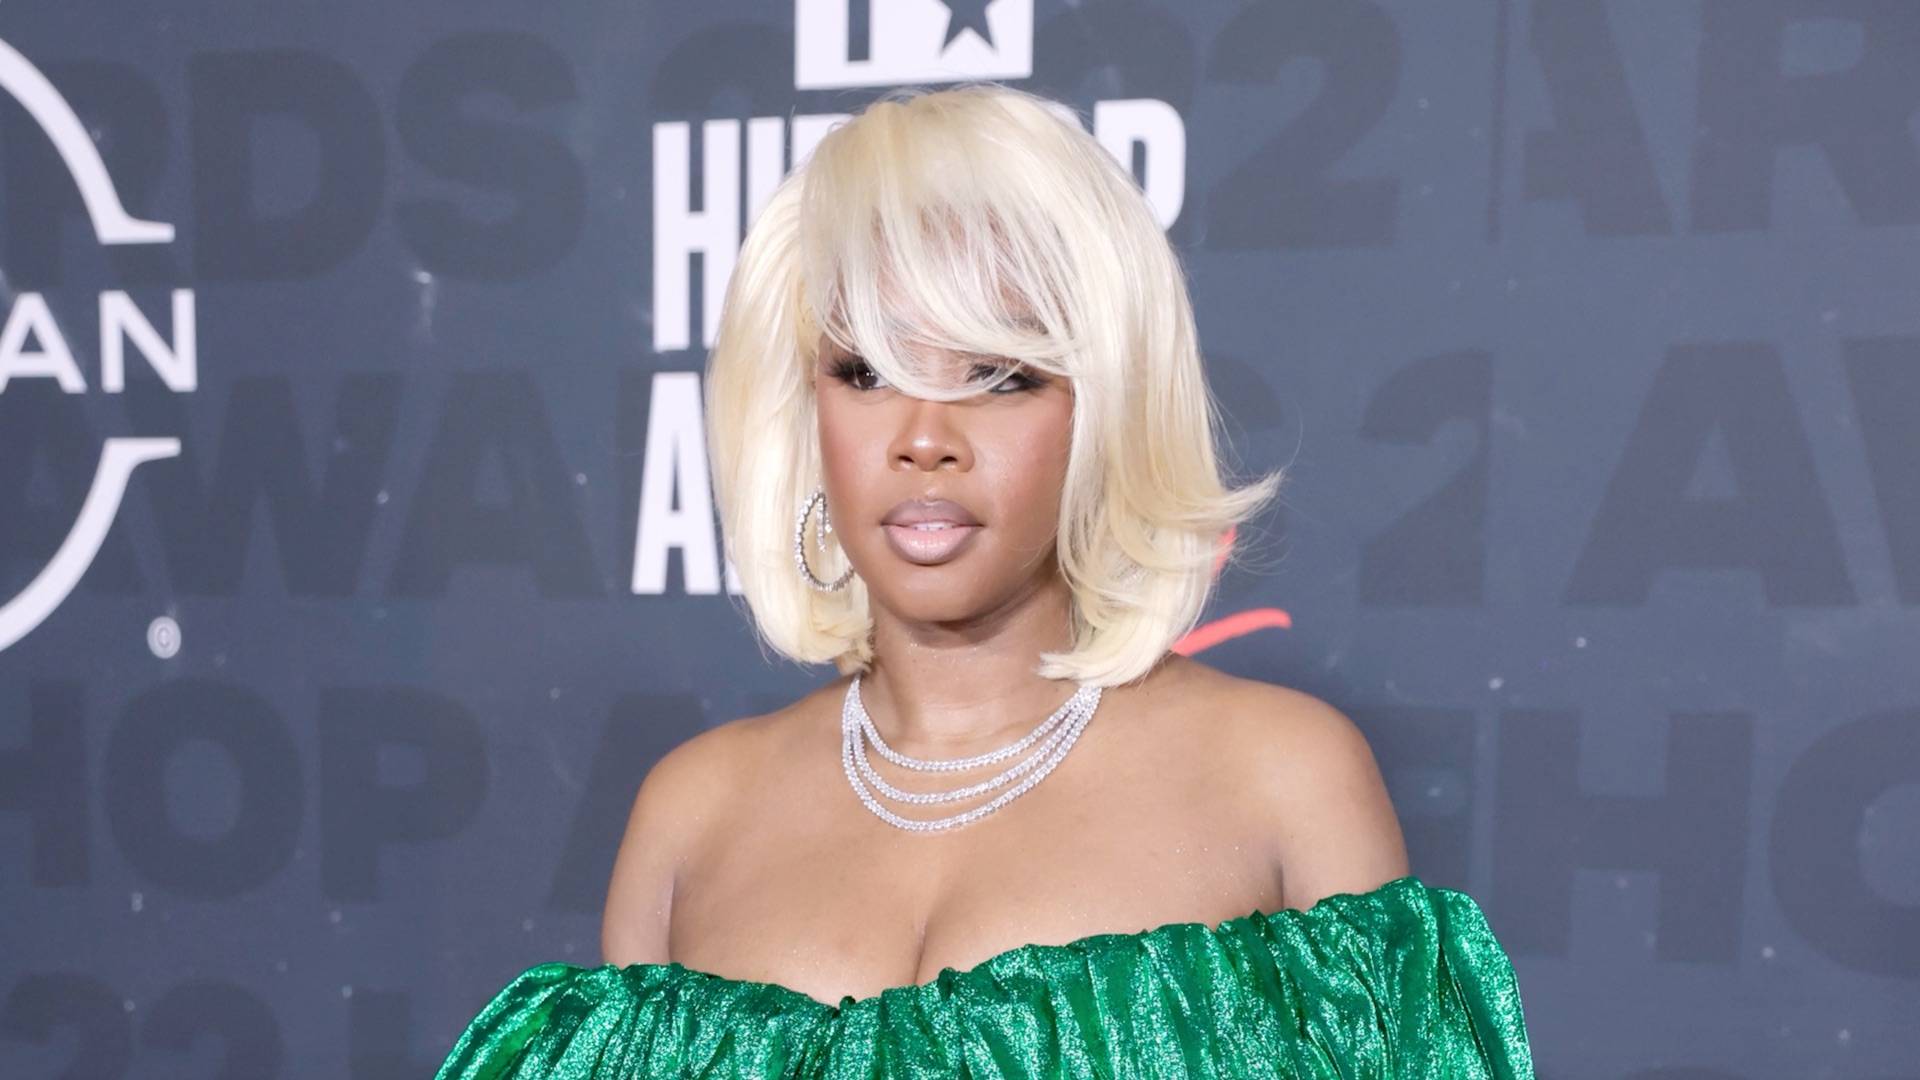 Remy Ma on the BET Hip Hop Awards 2022 Red Carpet.